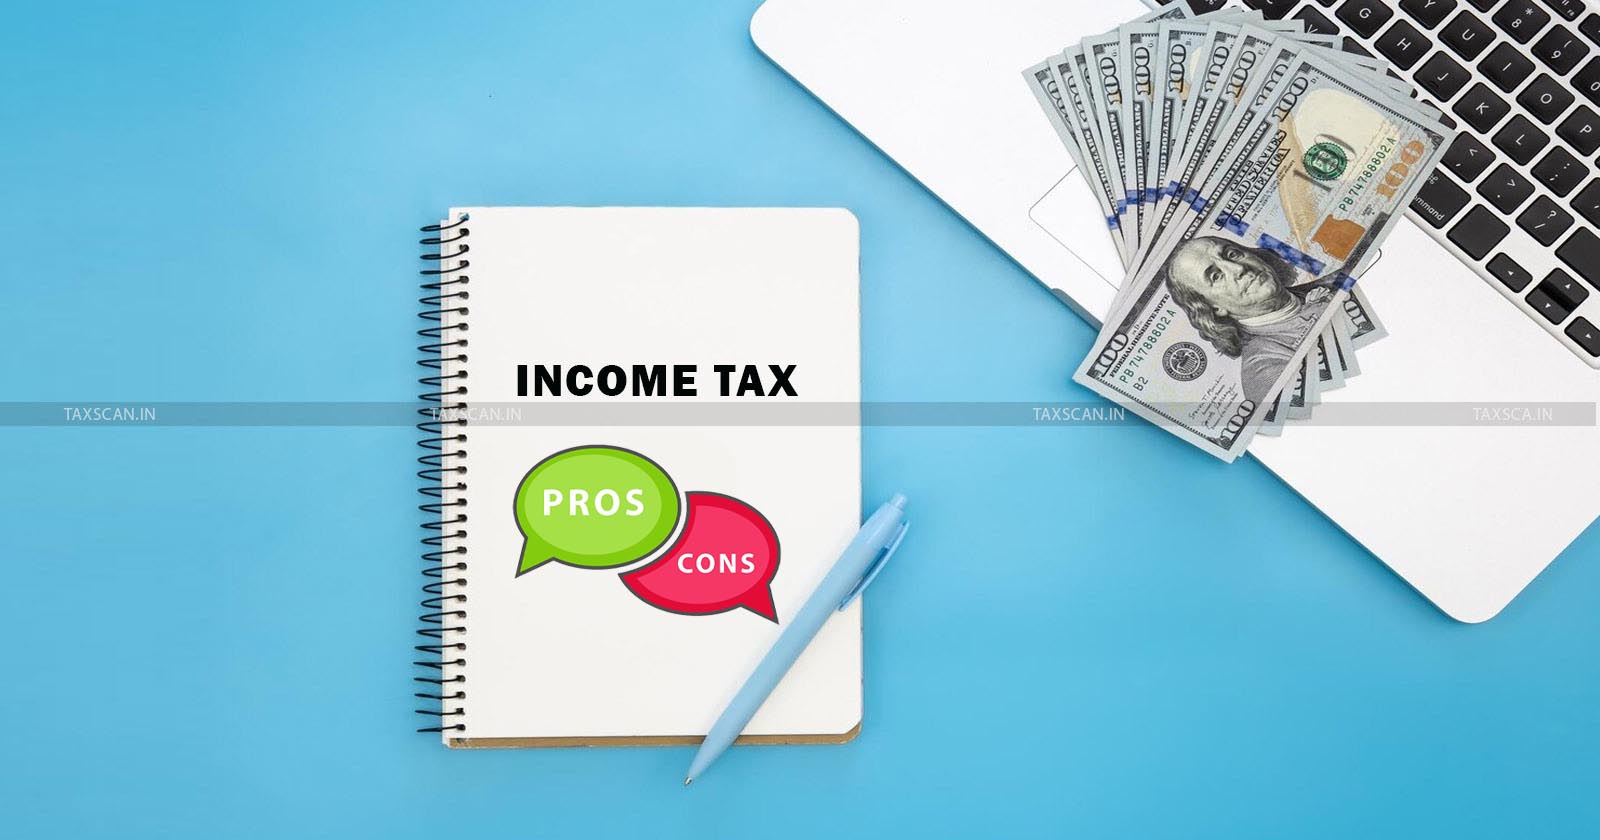 Progressive Income Tax - low income earners - Pros and Cons - TAXSCAN